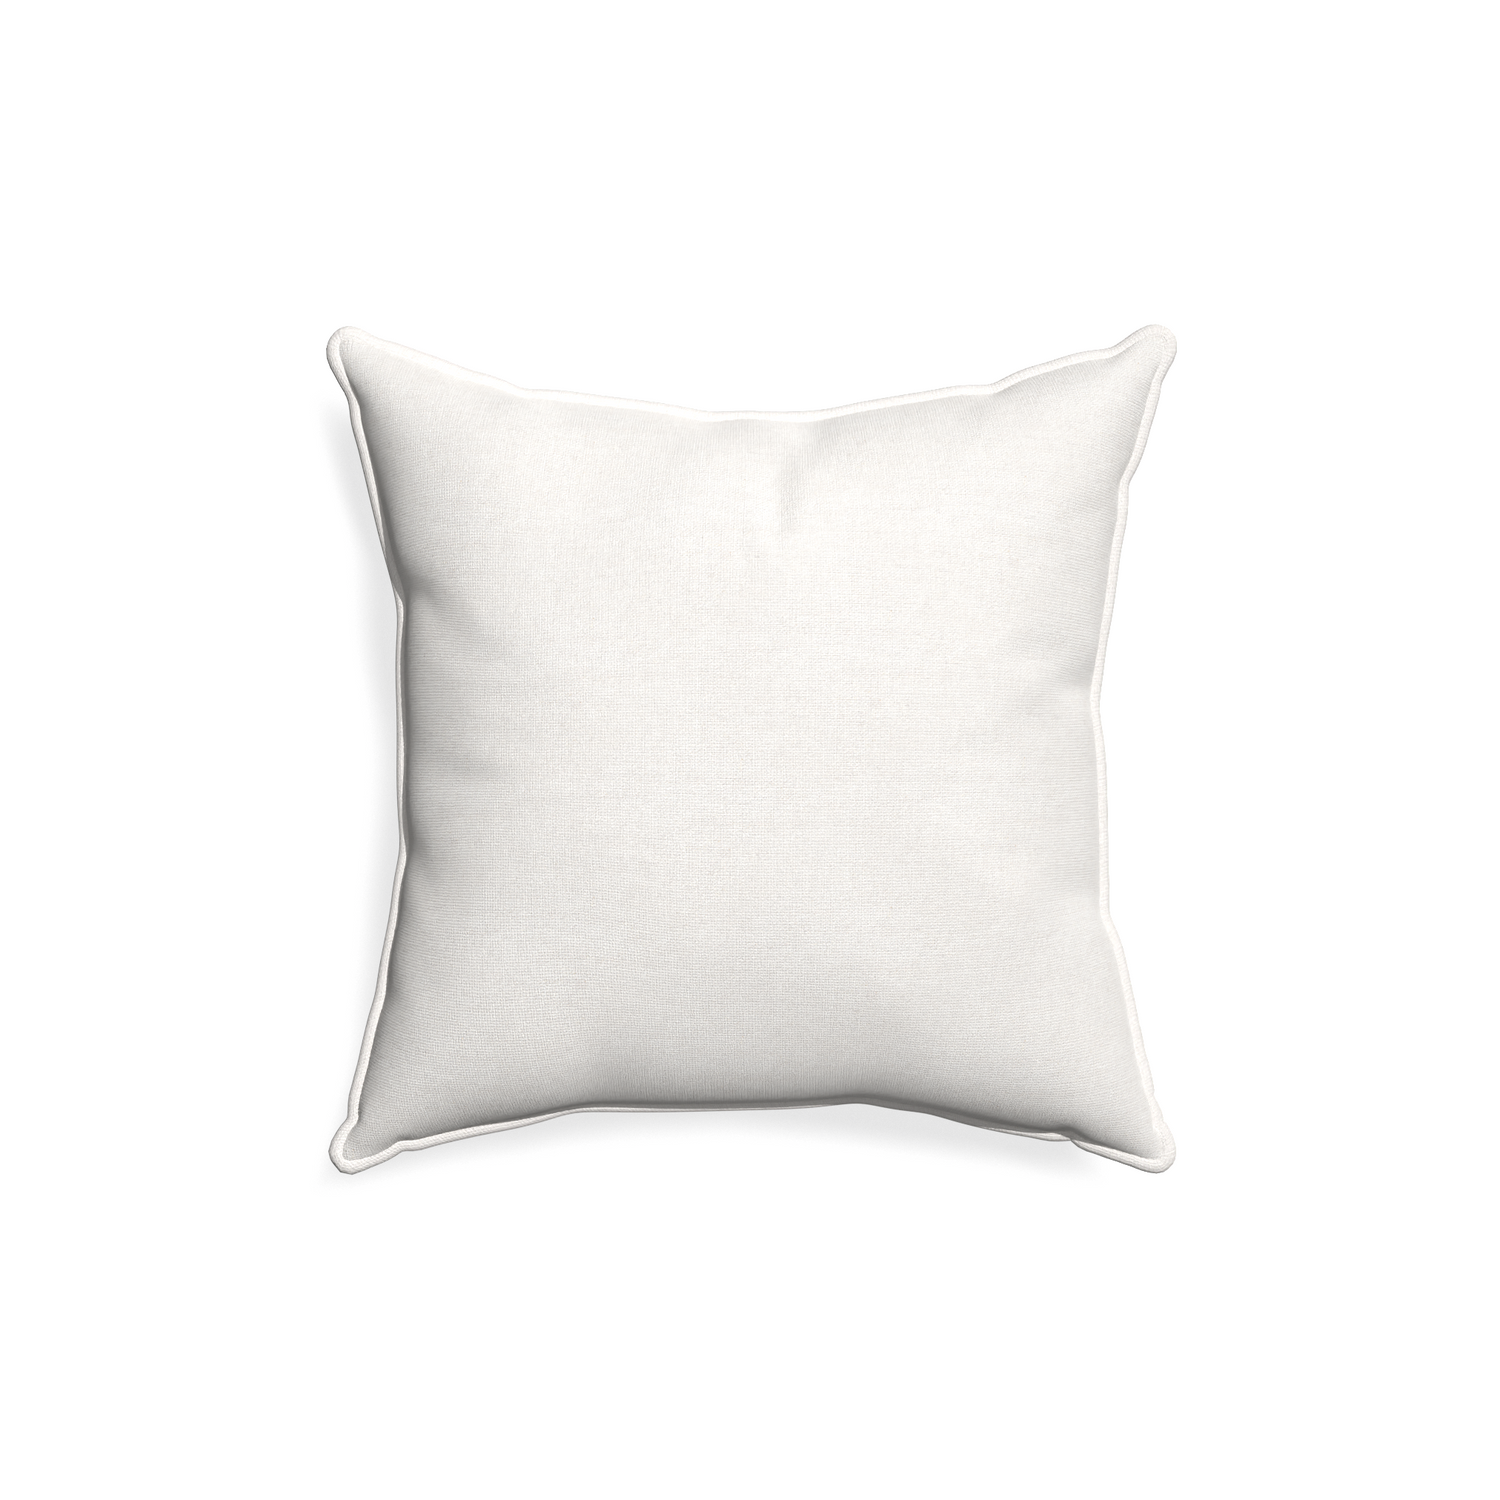 18x18 Cotton Canvas Pillow Cover Blank